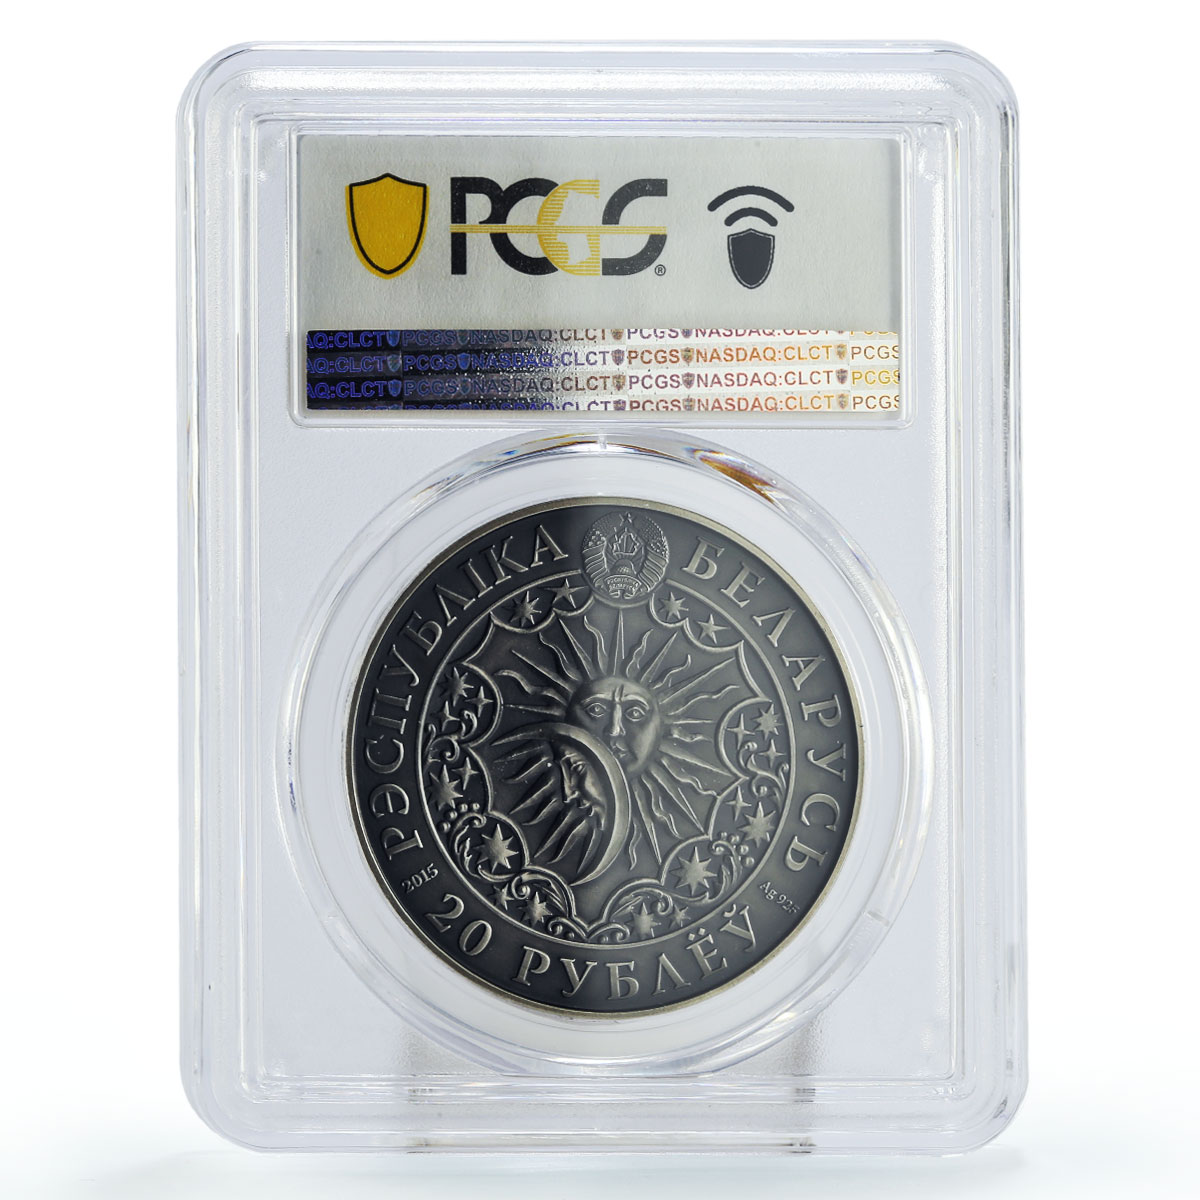 Belarus 20 rubles Zodiac Signs series Virgo MS70 PCGS silver coin 2015